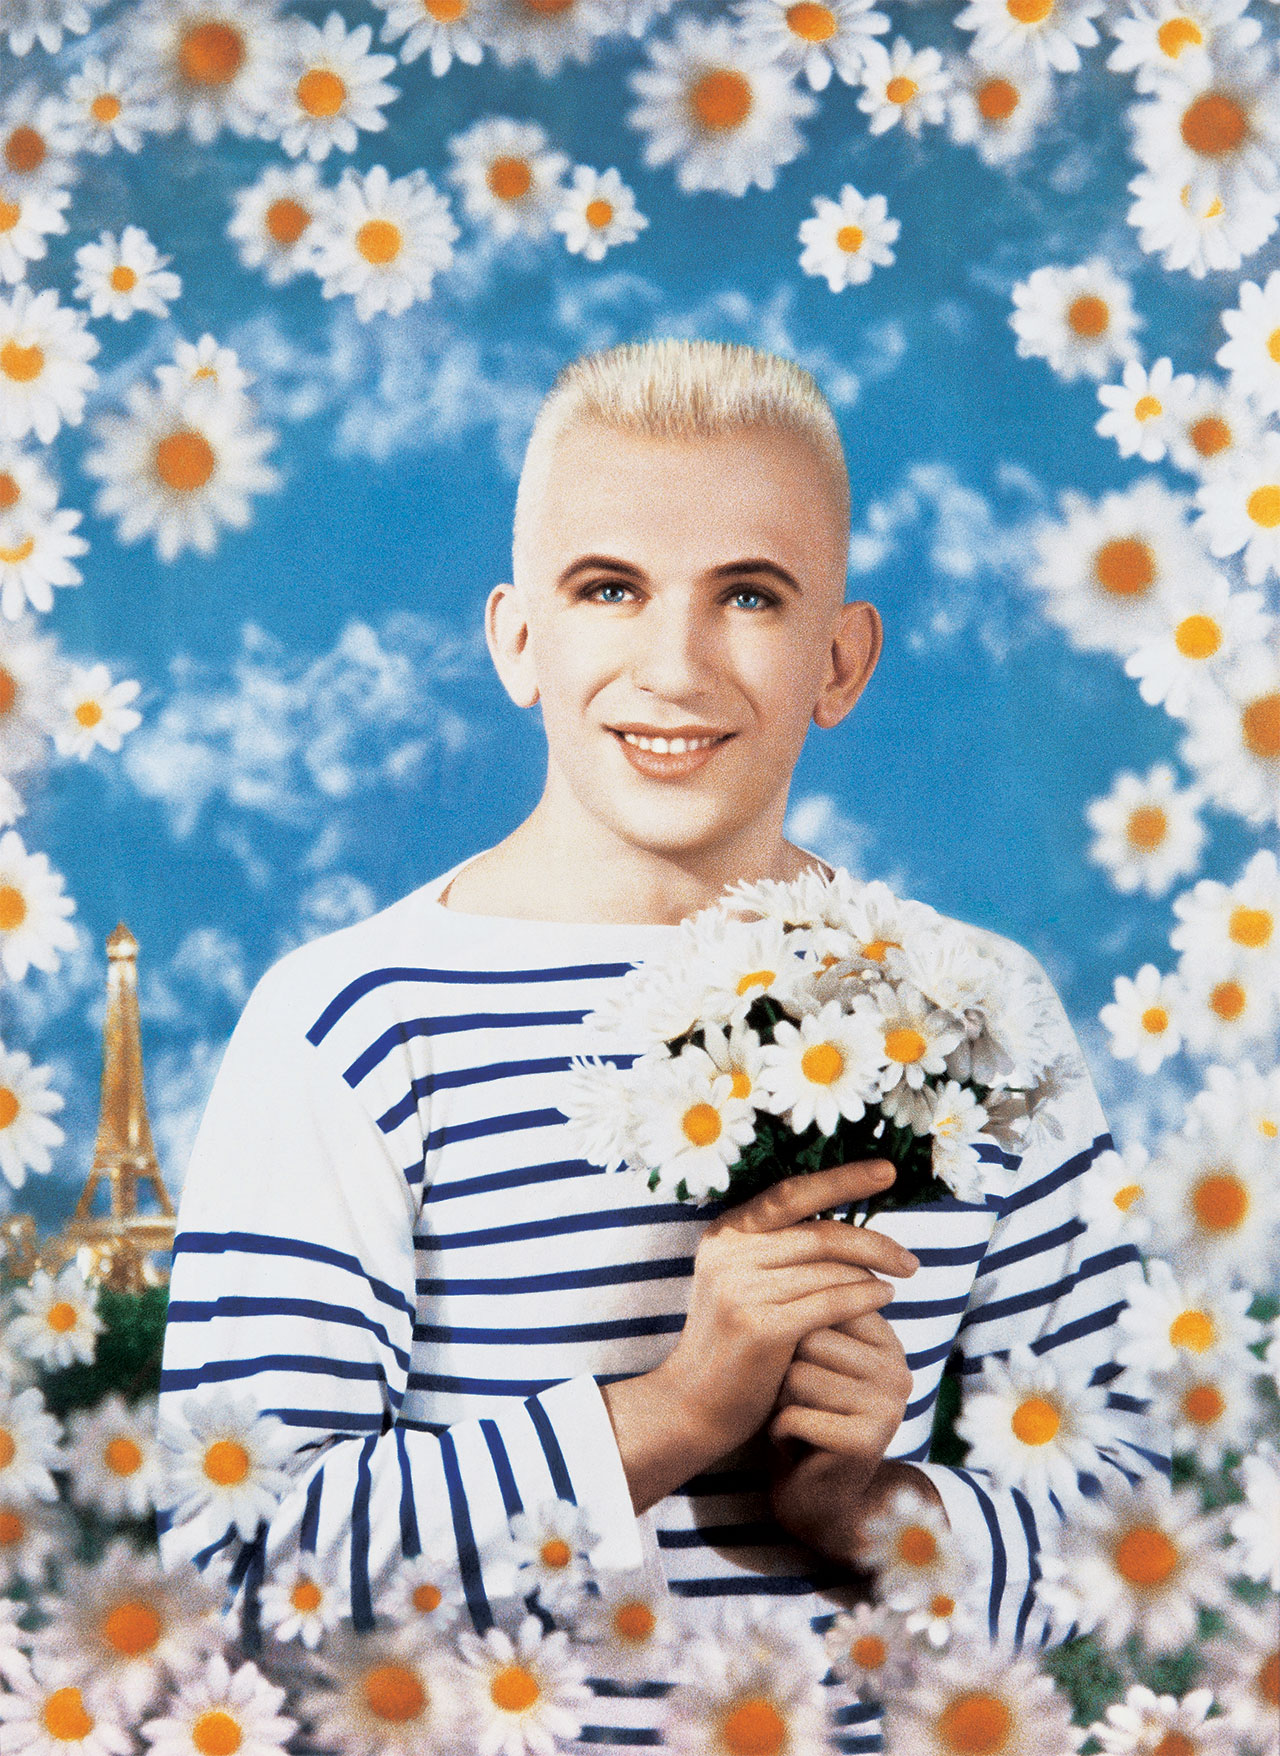 The Fashion World Of Jean Paul Gaultier: From The Sidewalk To The